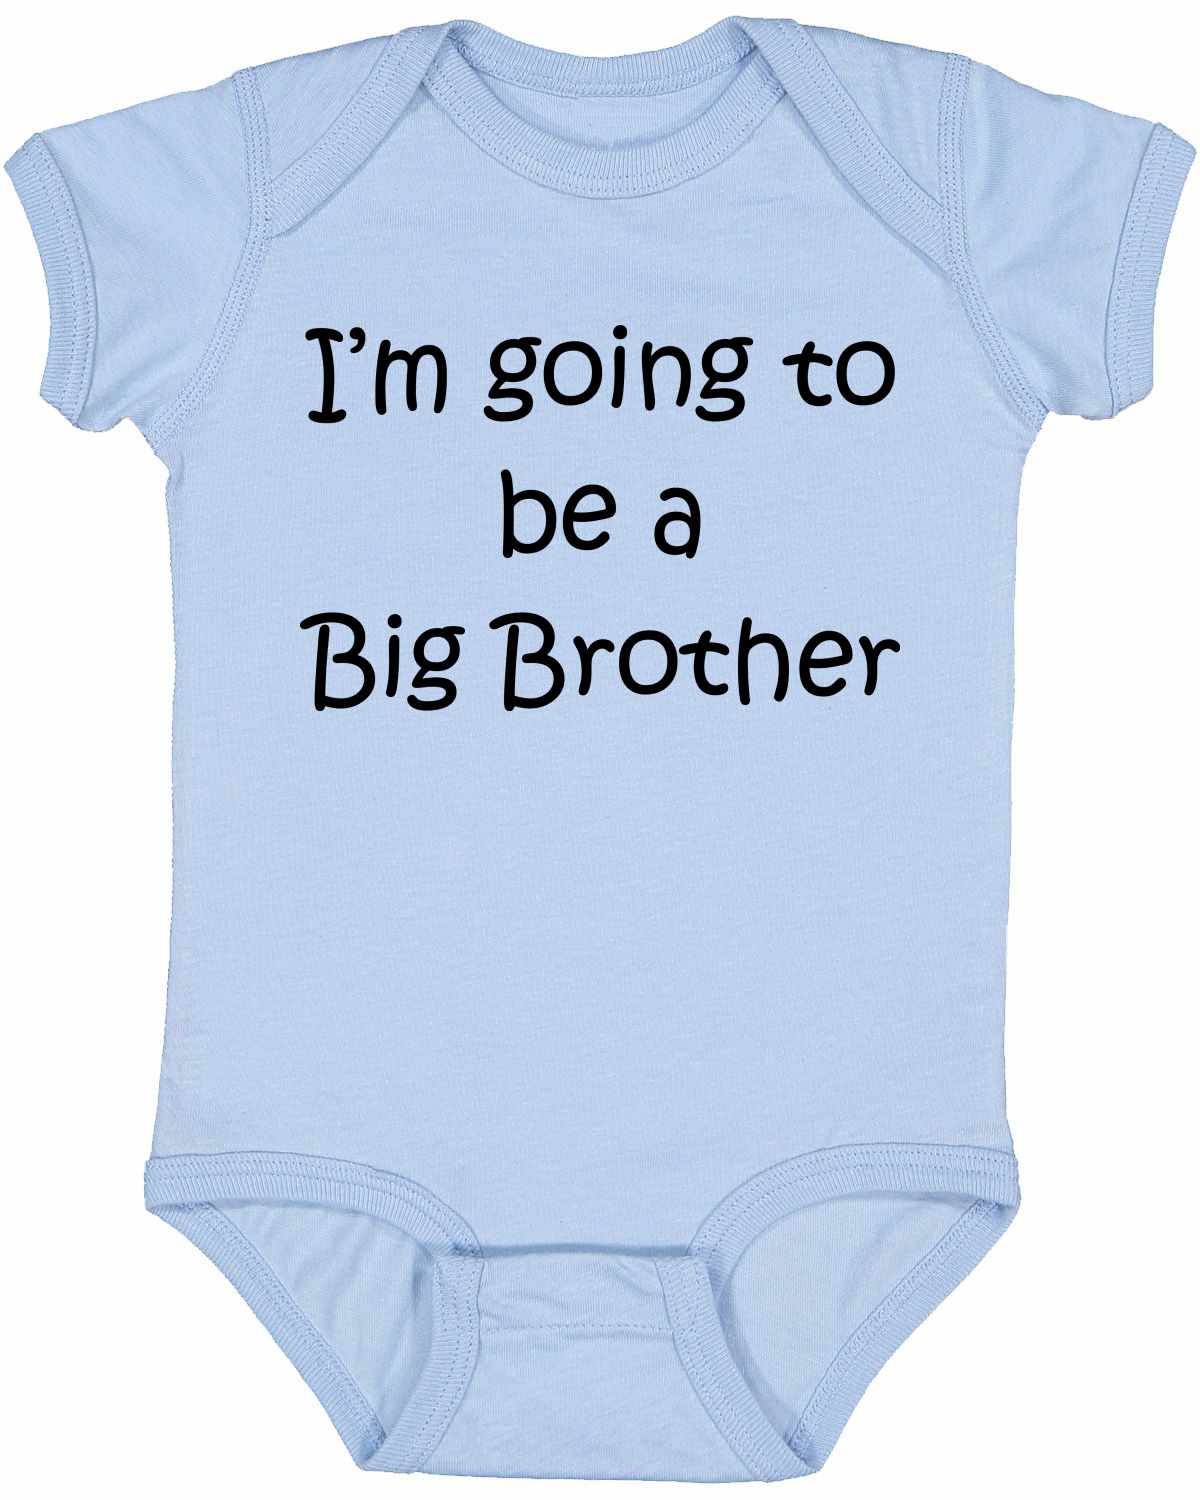 I'M GOING TO BE A BIG BROTHER on Infant BodySuit (#517-10)